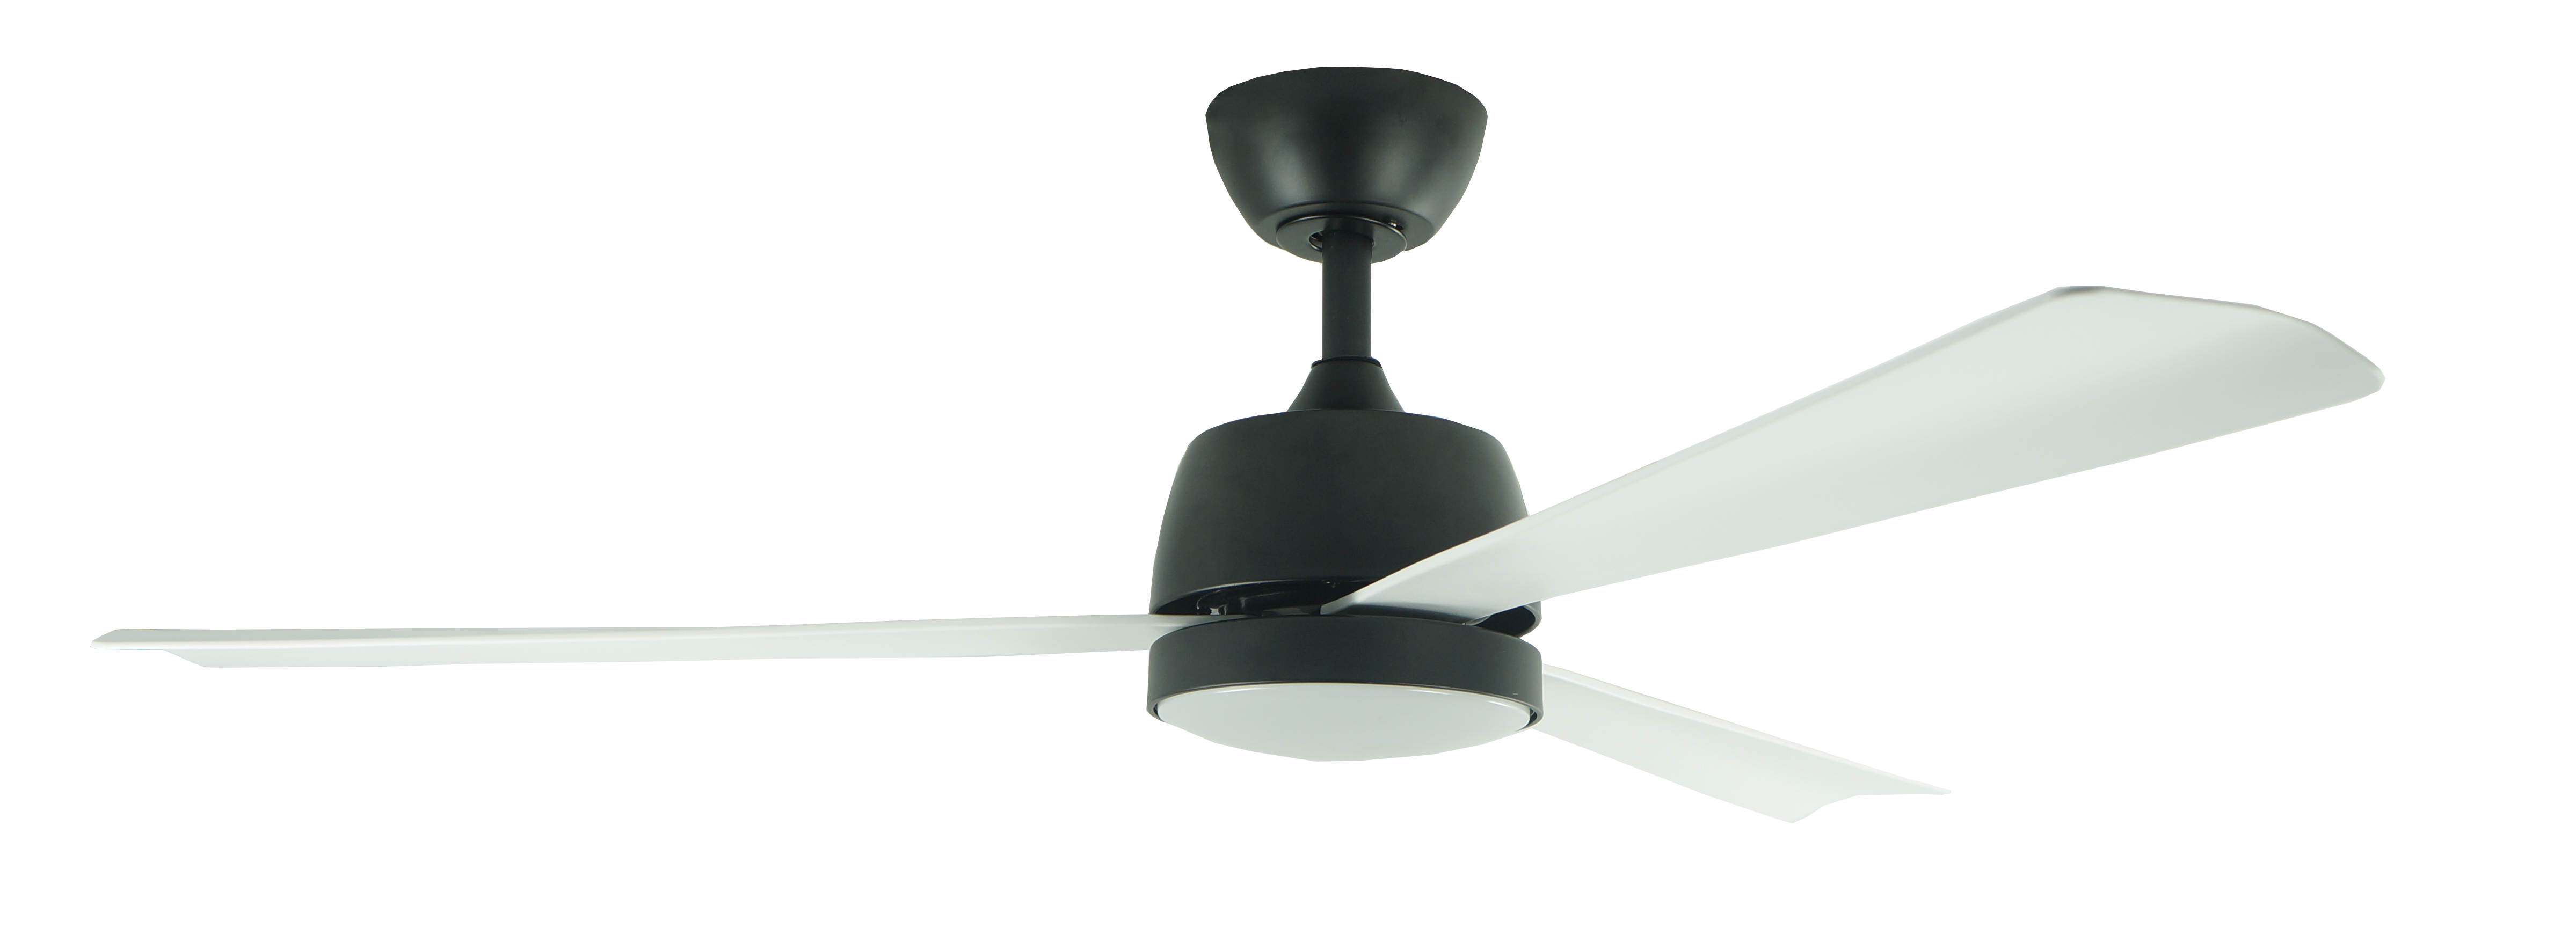 Airbena Ceiling Ceiling Fan 52 "ABS Fan Blade for Household Ceiling Fans Nature Air Flow Soft Warm Led Lamp